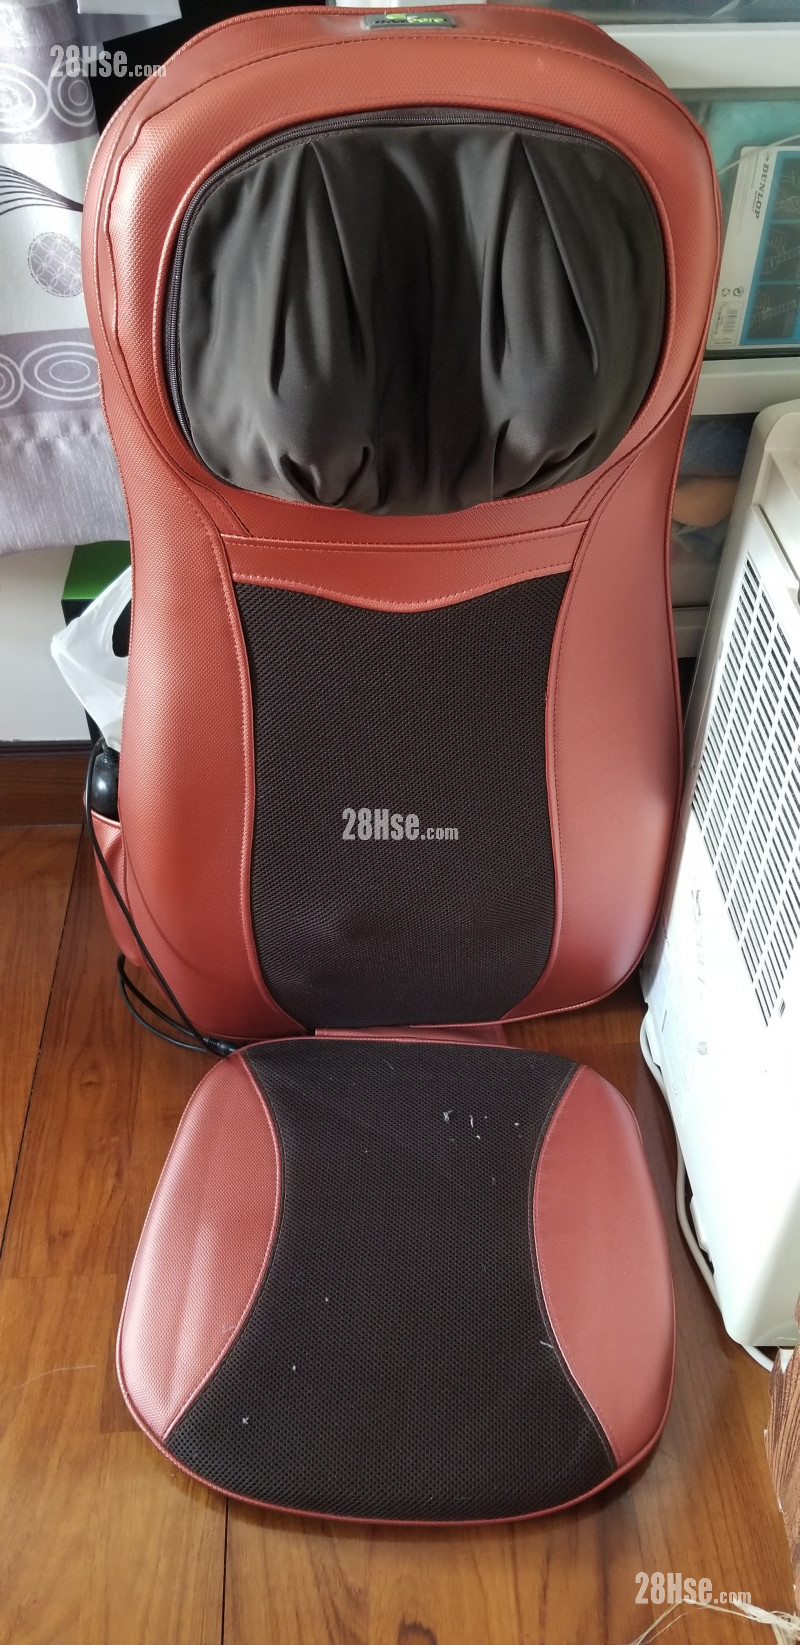 Massage chair (Used Furniture)